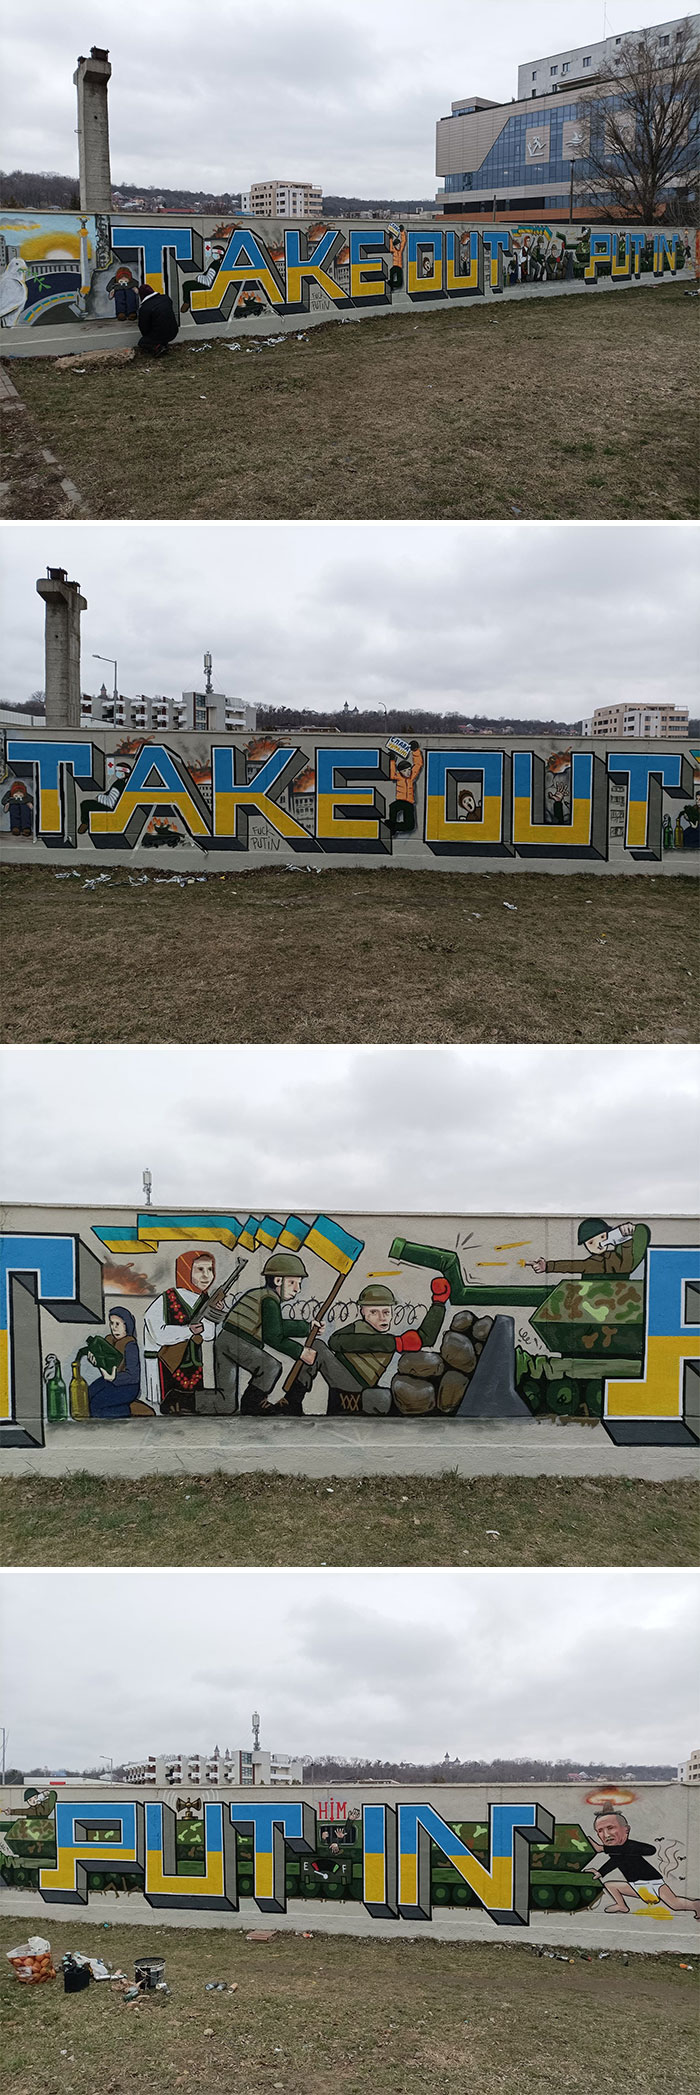 Local Graffiti Artists From Iasi, Romania Are Depicting The Astonishing Ukrainian Resistance On A Wall